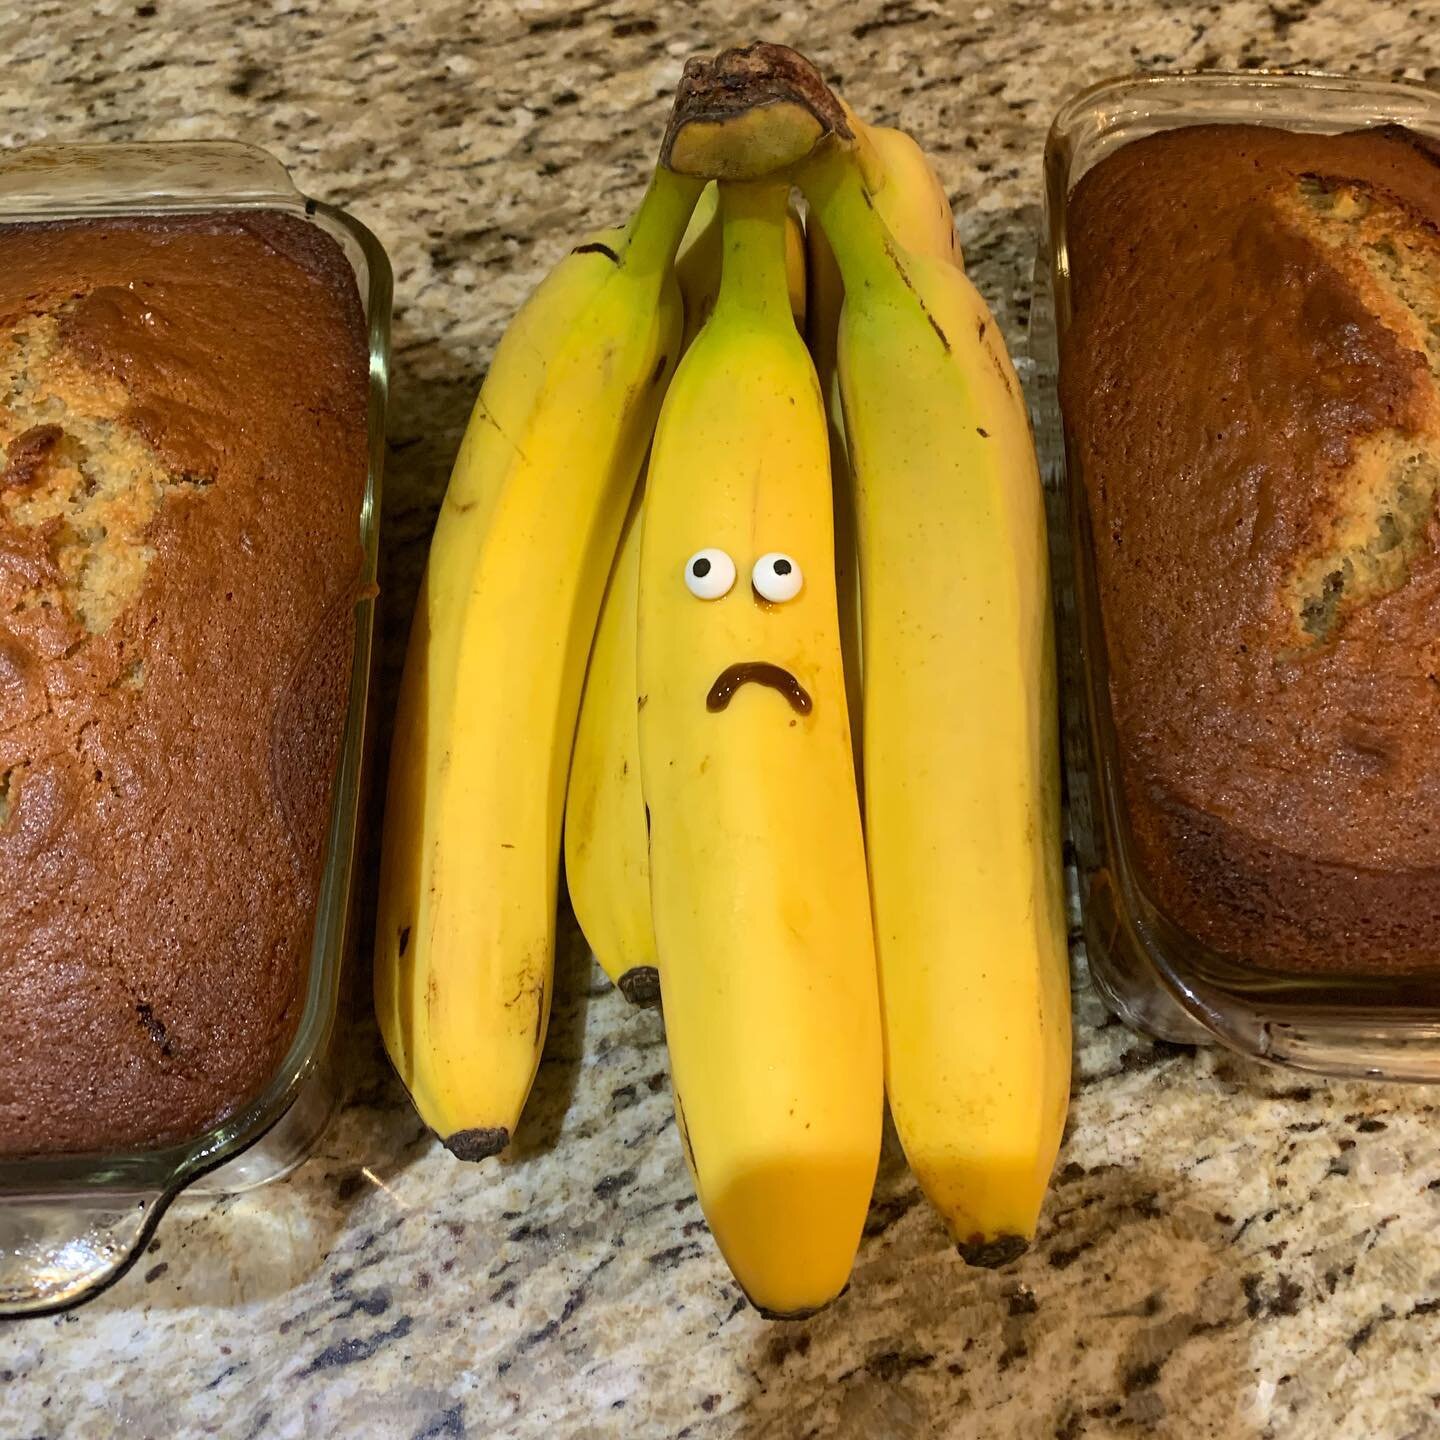 Yesterday was national banana bread day.  So busy making OSPCA cupcakes these poor guys felt ignored.  Happy belated national banana bread day #nationalbananabreadday #betterlatethannever #cupcakedayca #ospca